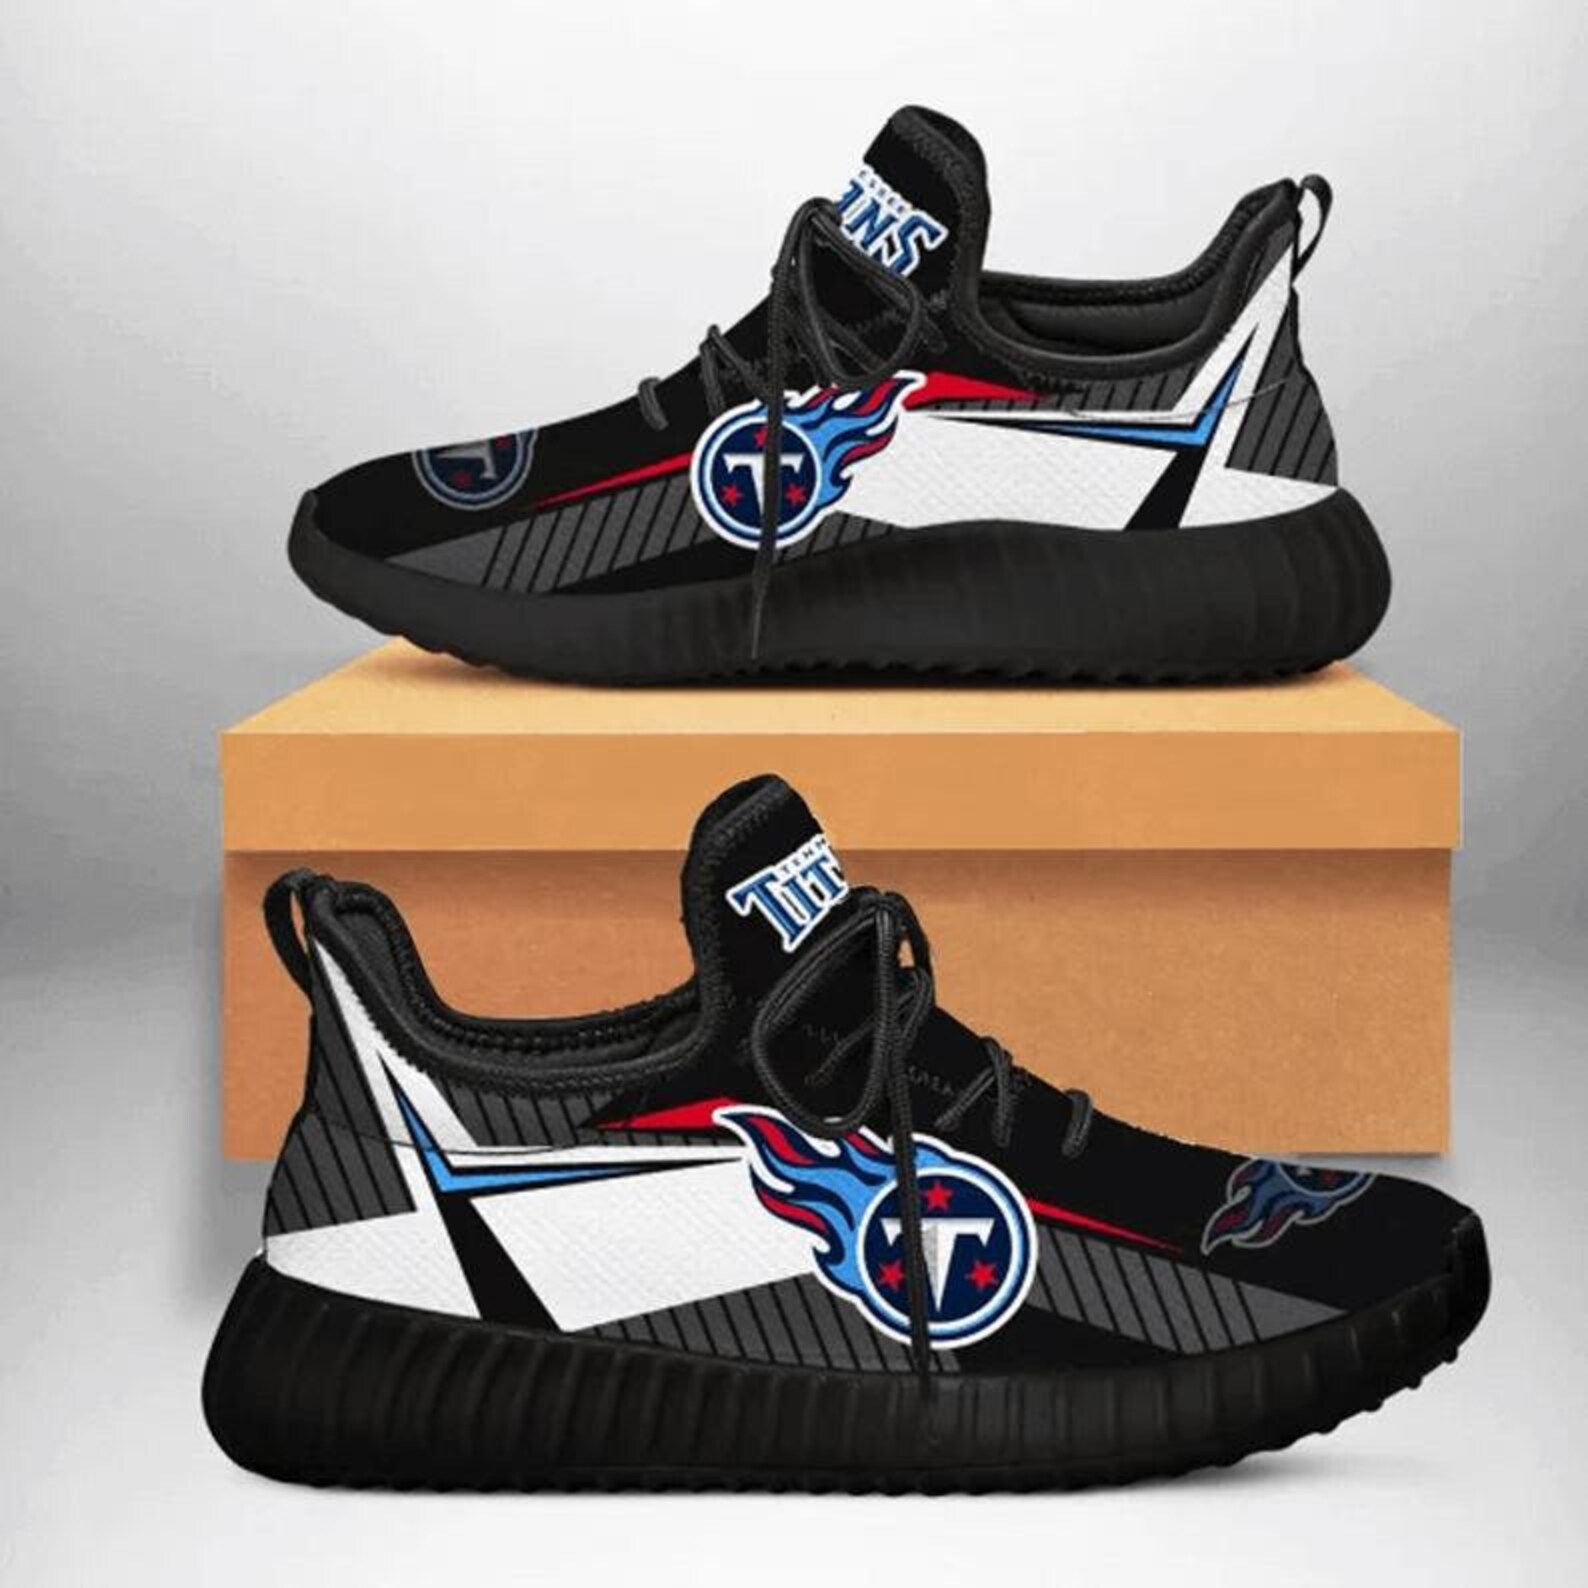 Tennessee Titans Yeezy Boost 350 Tennessee Titans Yeezy 350 | Etsy